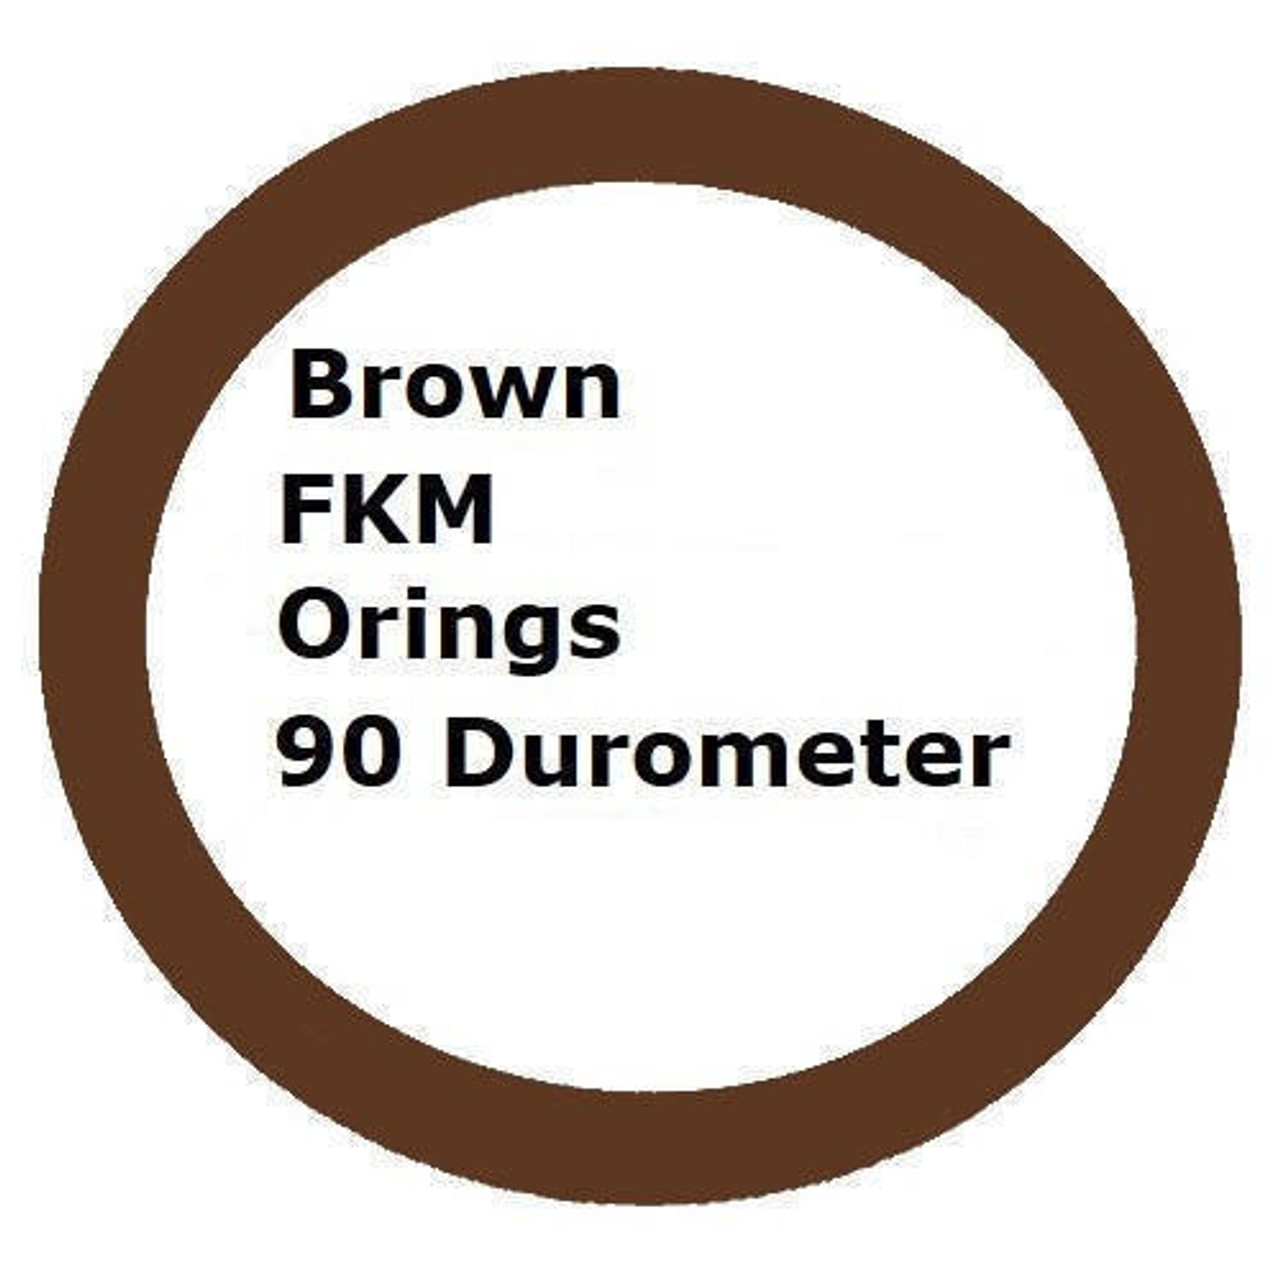 FKM 90 Brown Orings Size 252 Price for 1 pc